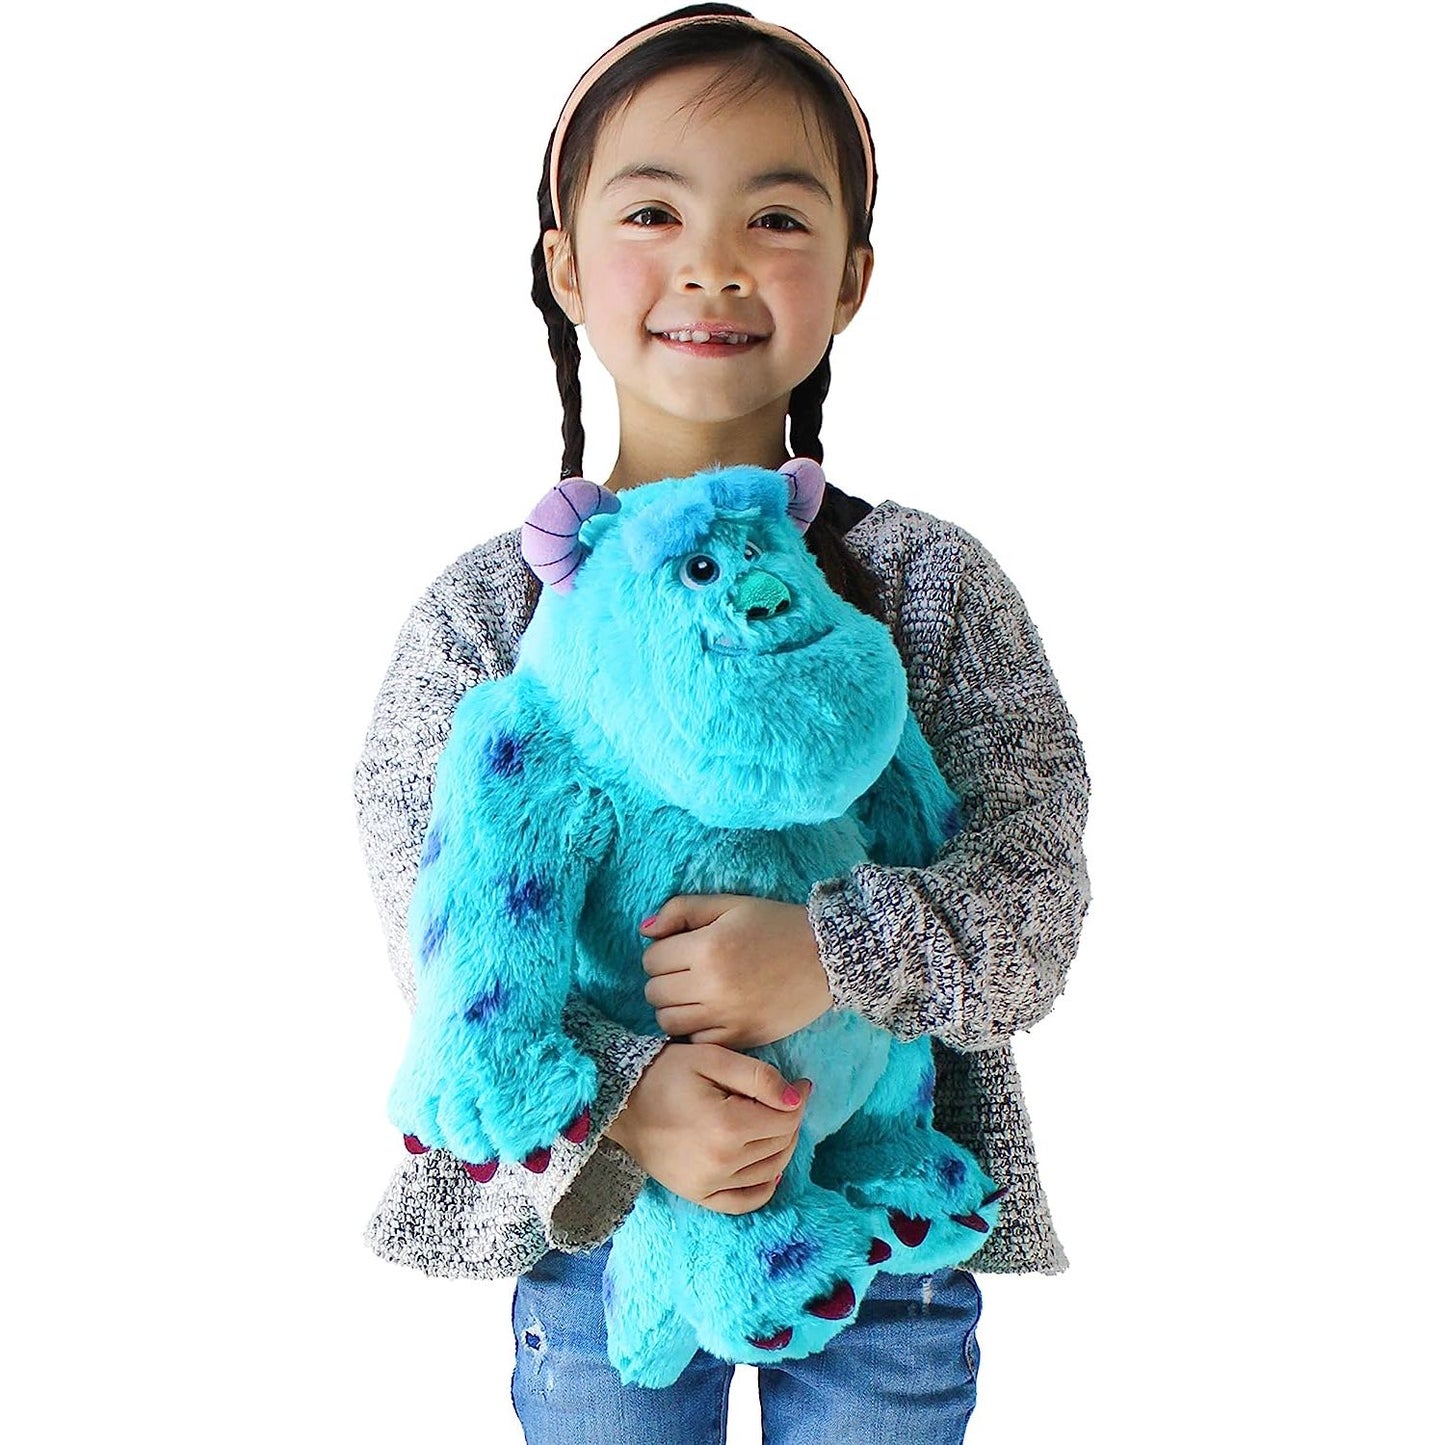 Disney - Pixar - Monsters Inc. - Soft Plush Sulley - 14Inch in hand of girl - Heretoserveyou